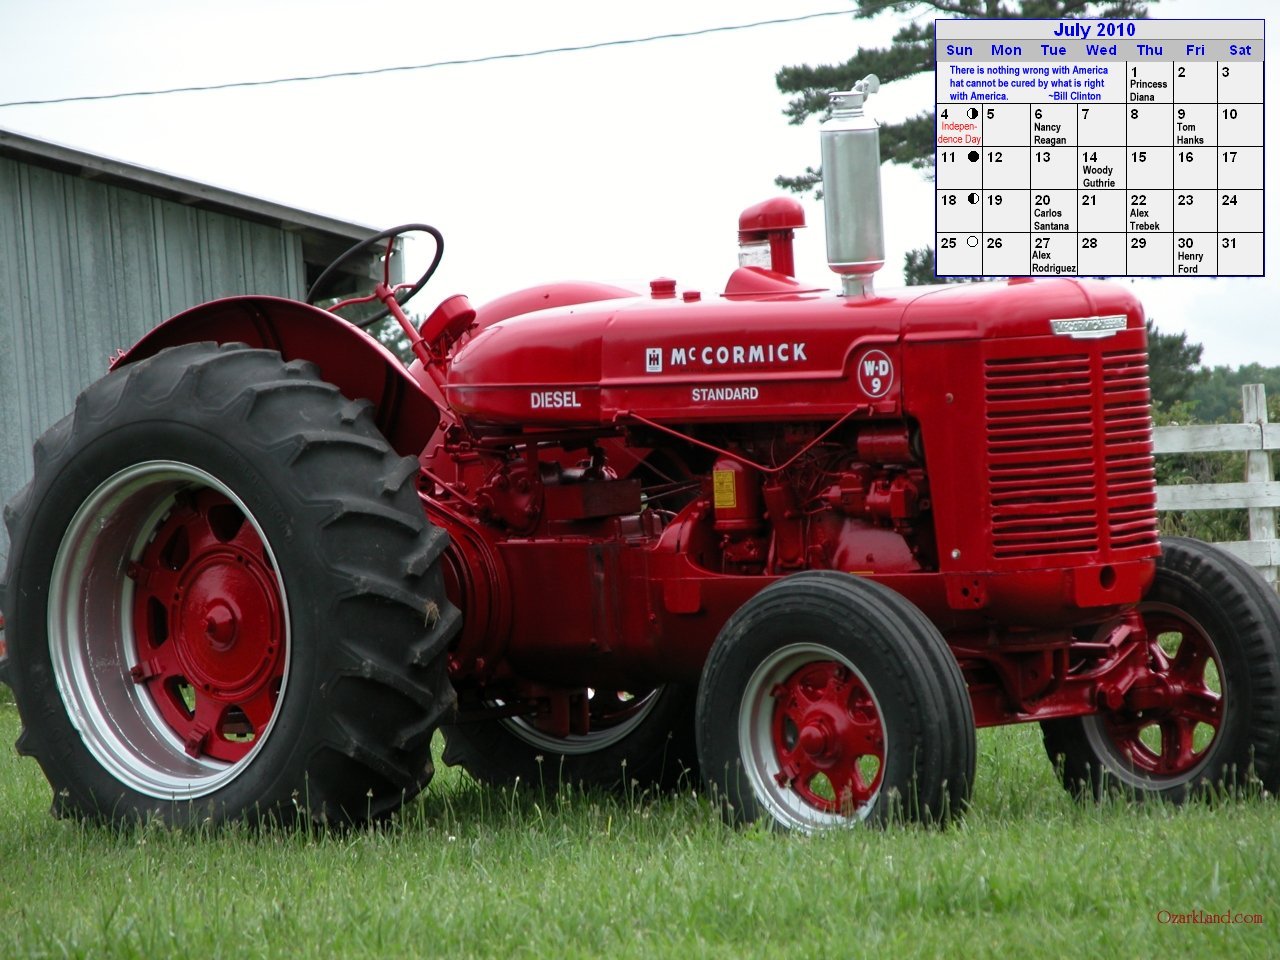 The International Harvester Co was primarily known for the production